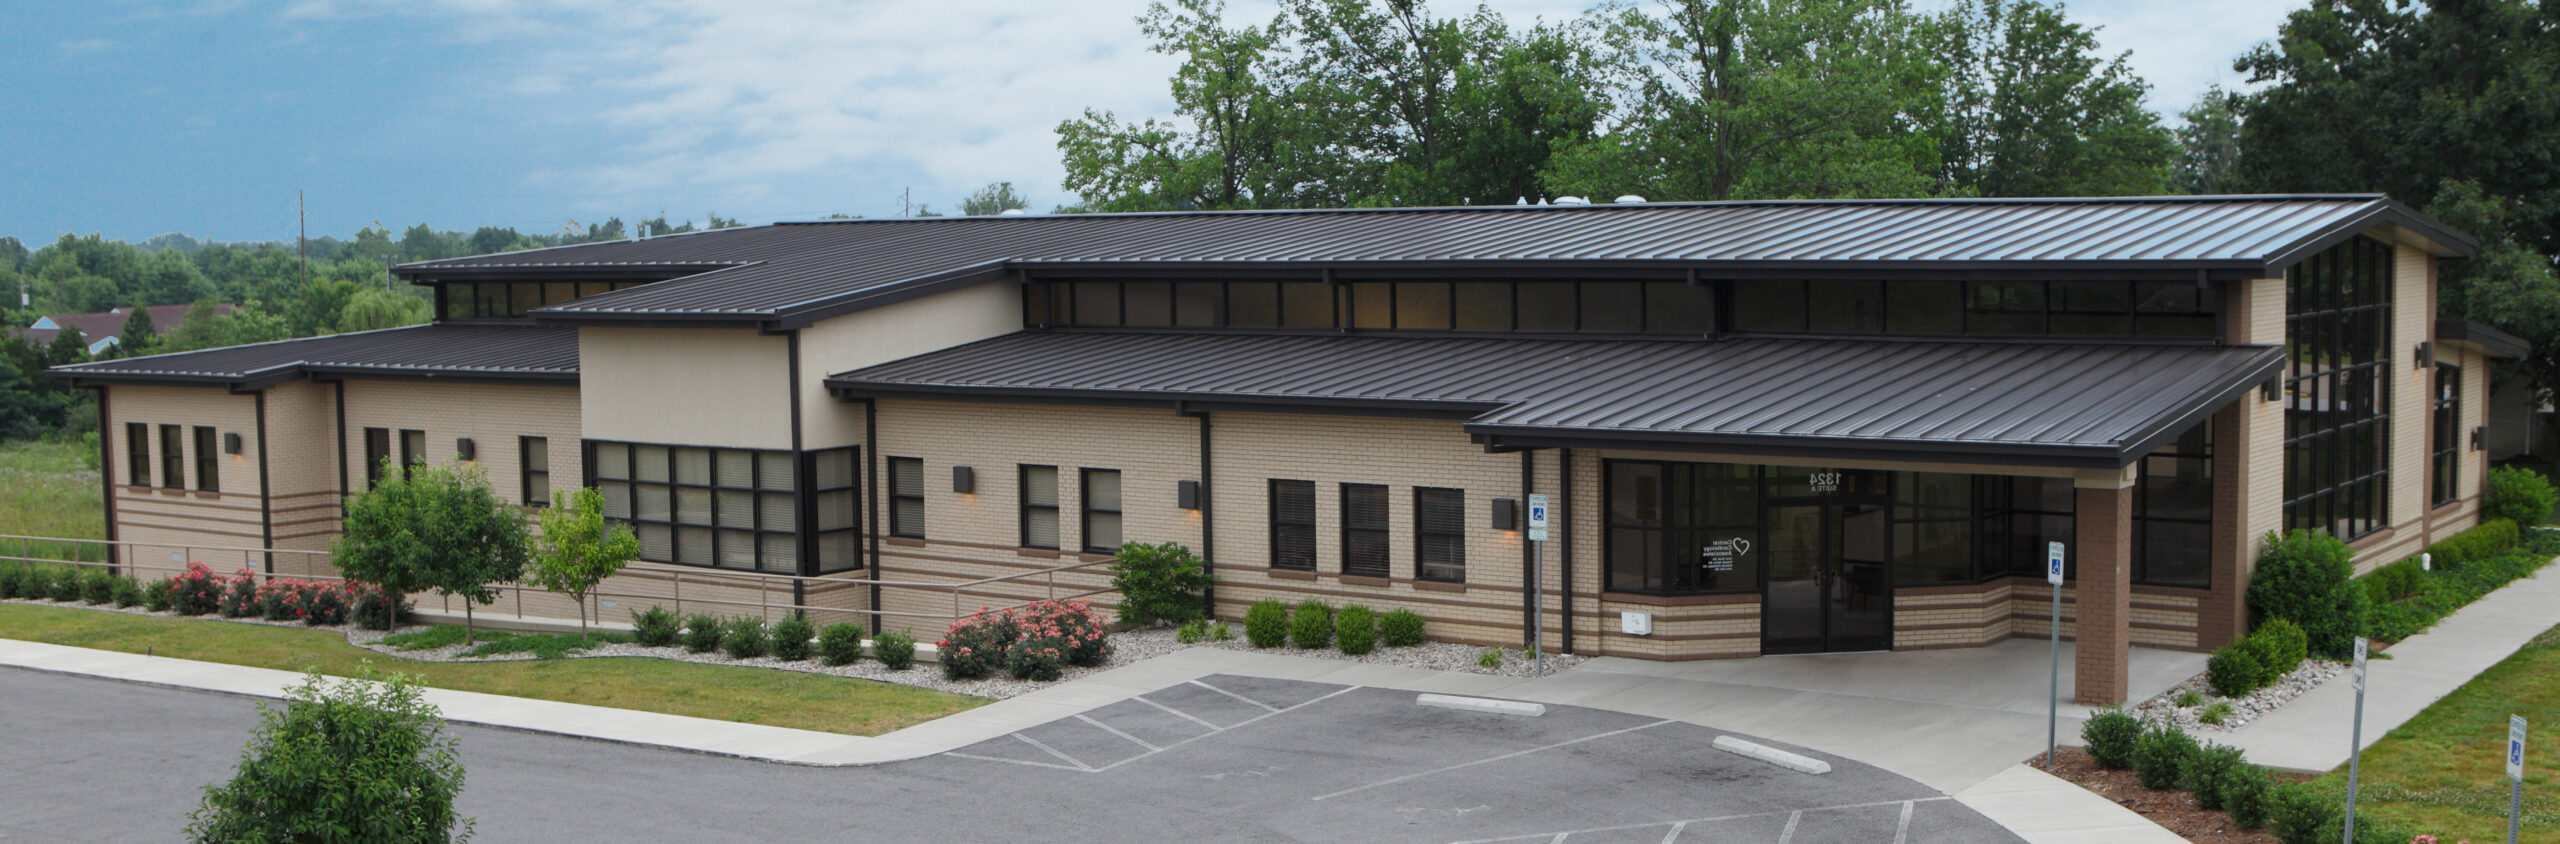 COMMERCIAL BUILDING WITH METAL ROOF AND CONCEALED FASTENERS